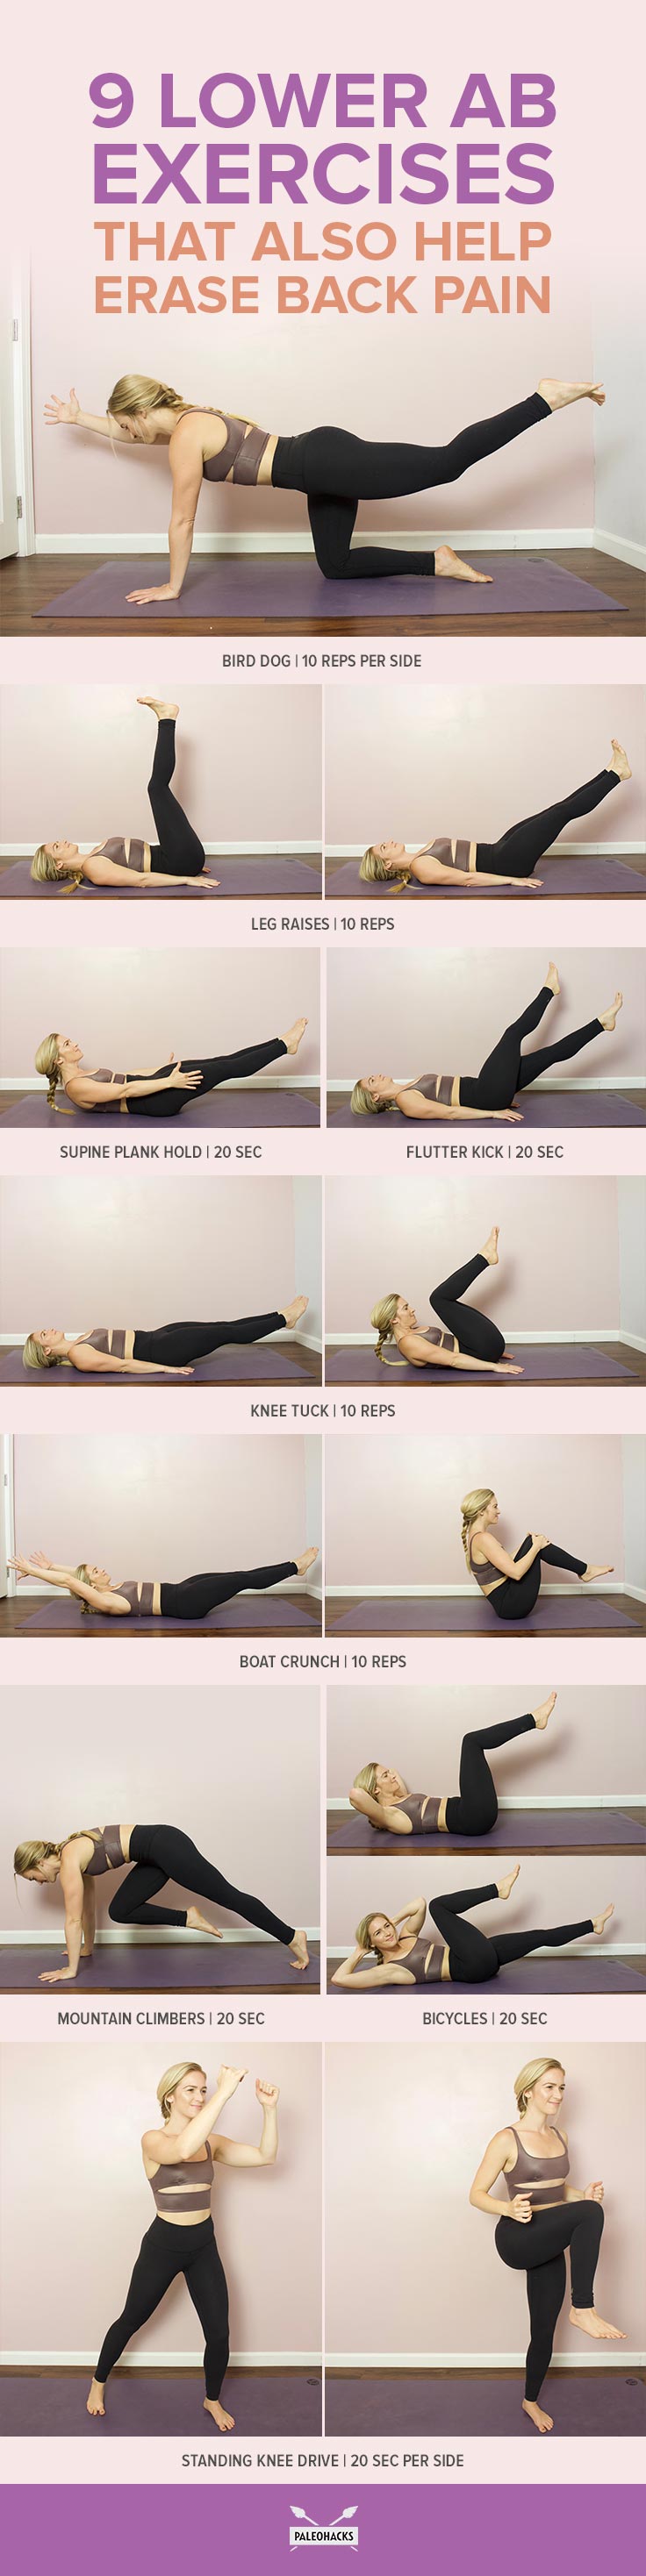 Here’s a double whammy: These nine lower ab exercises will sculpt and tone your abs while easing your back pain!